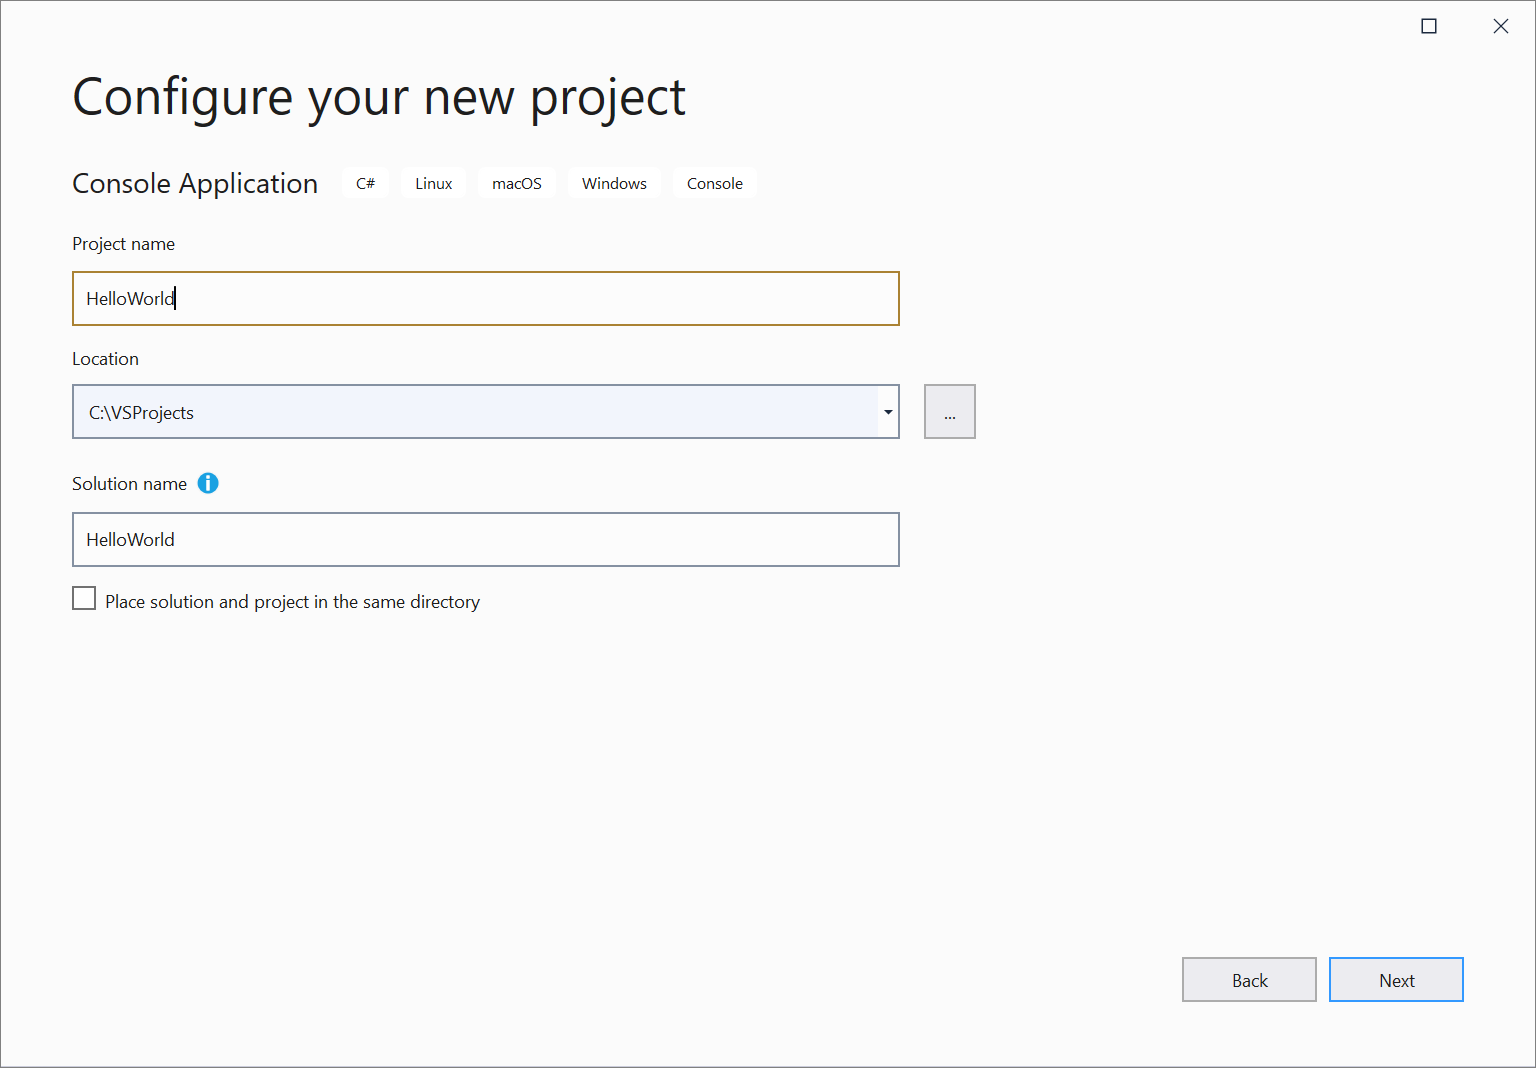 Screenshot of the 'Configure your new project' window in Visual Studio 2019, where you enter the name of the project.